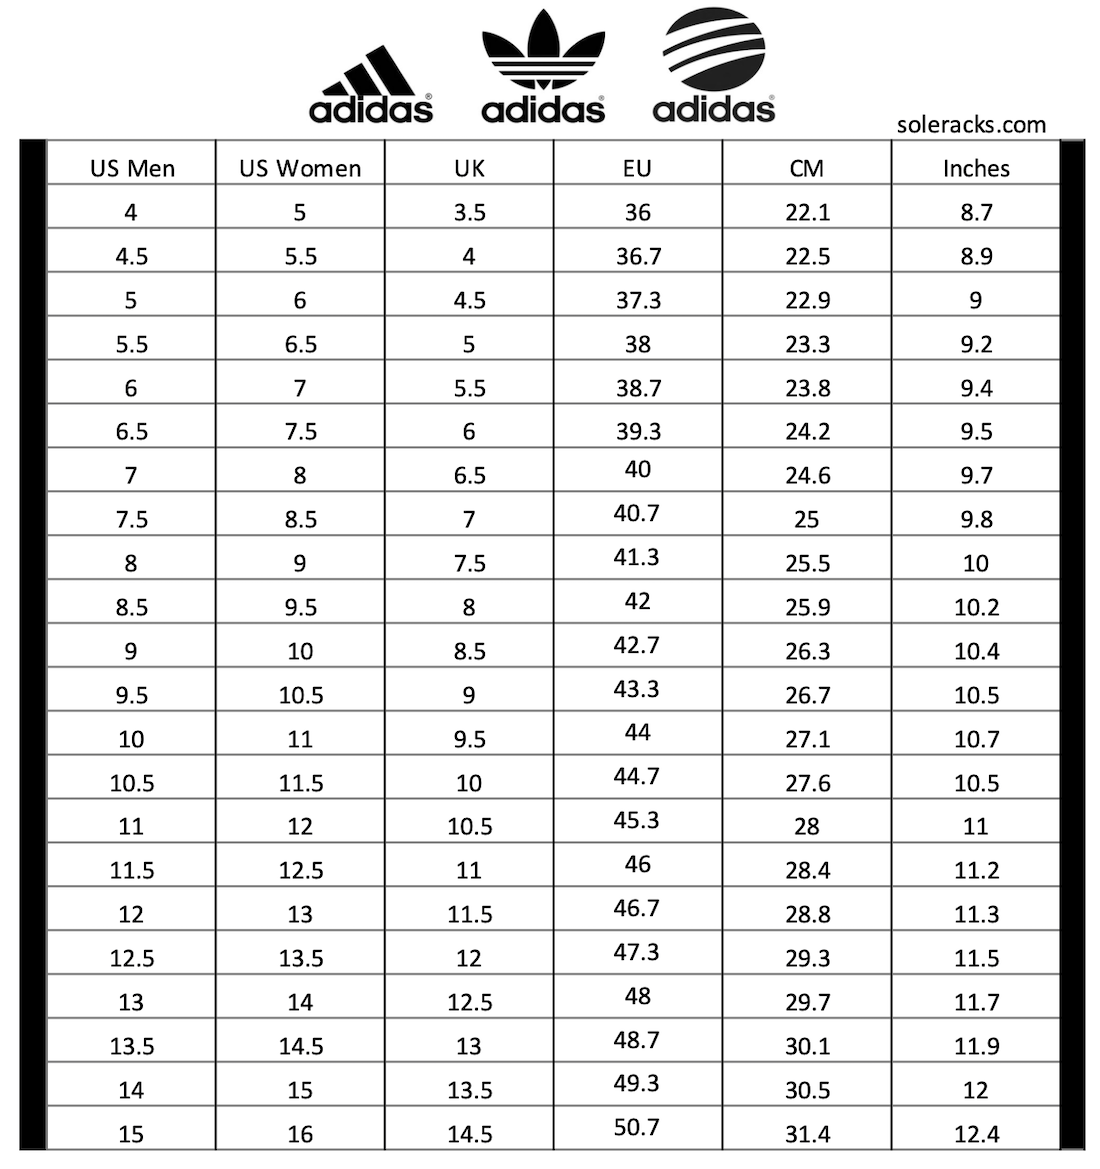 What Size Do I Wear in Adidas Shoes?